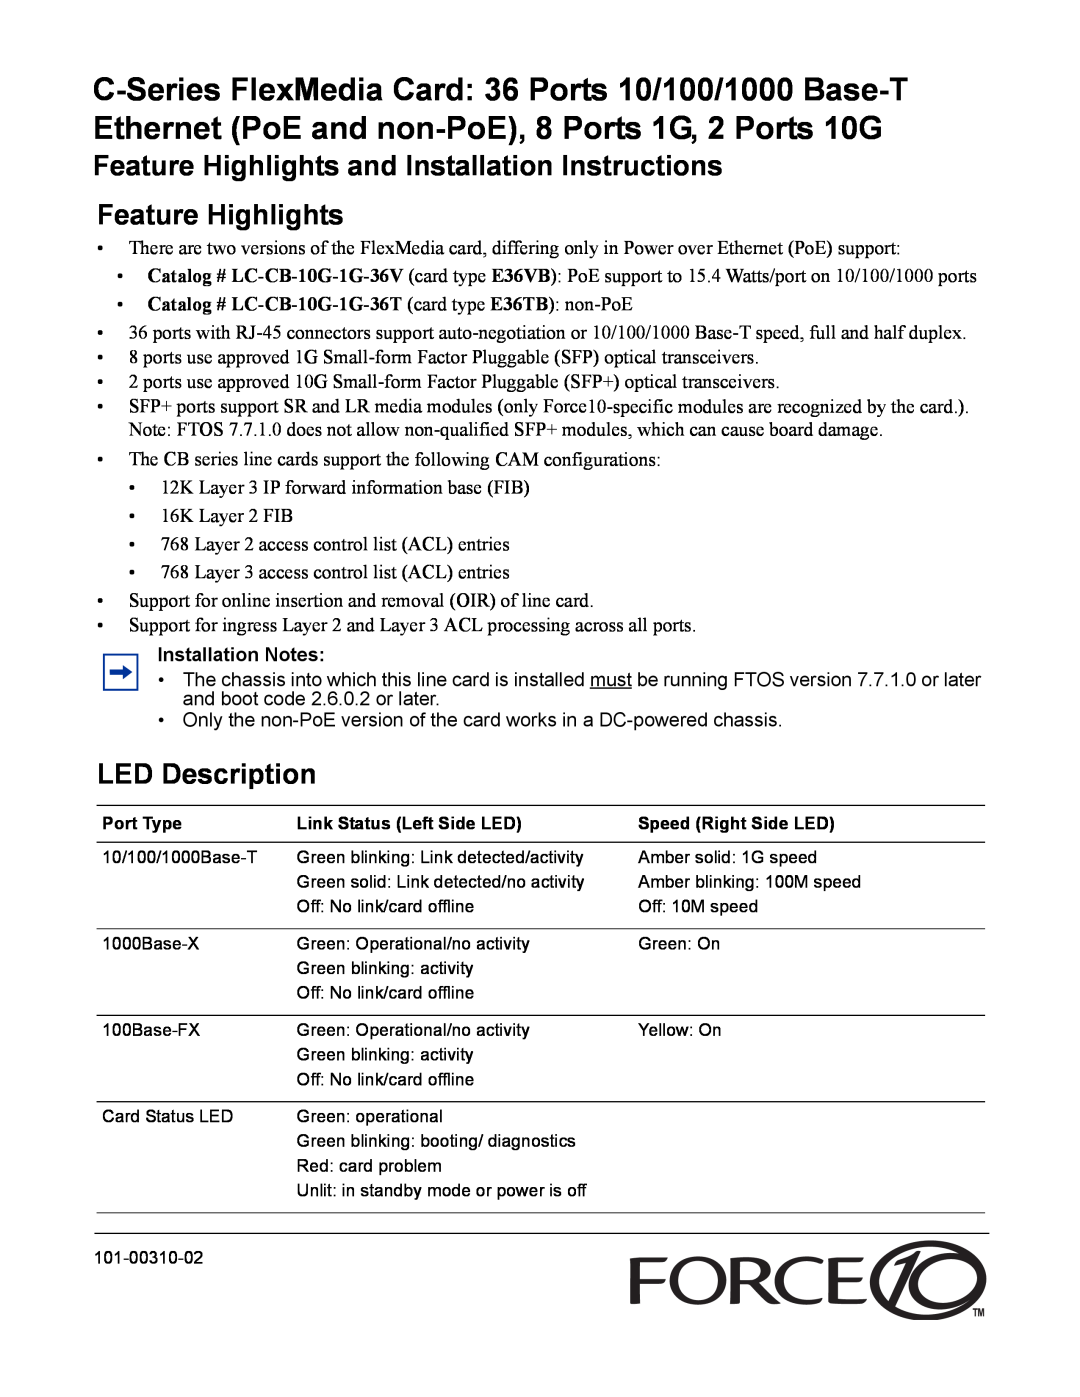 Force10 Networks C-Series installation instructions Feature Highlights and Installation Instructions Feature Highlights 